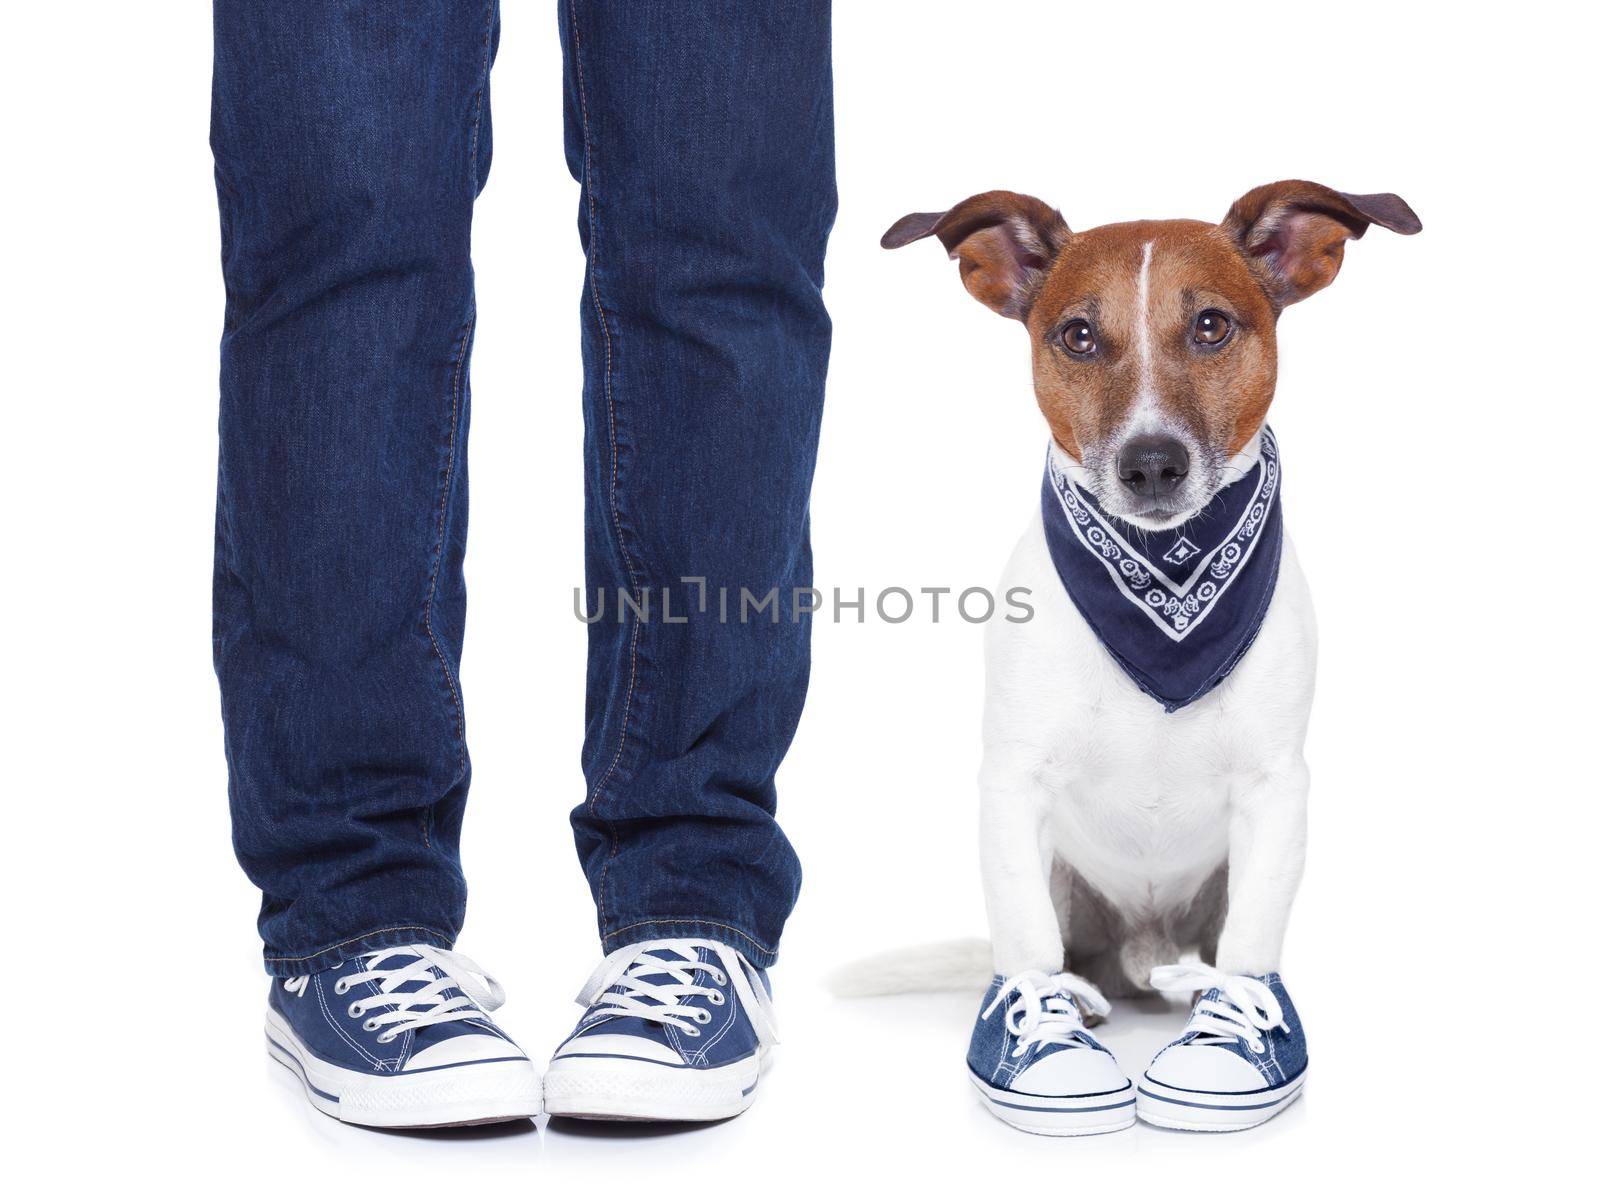 dog owner with dog both wearing sneakers